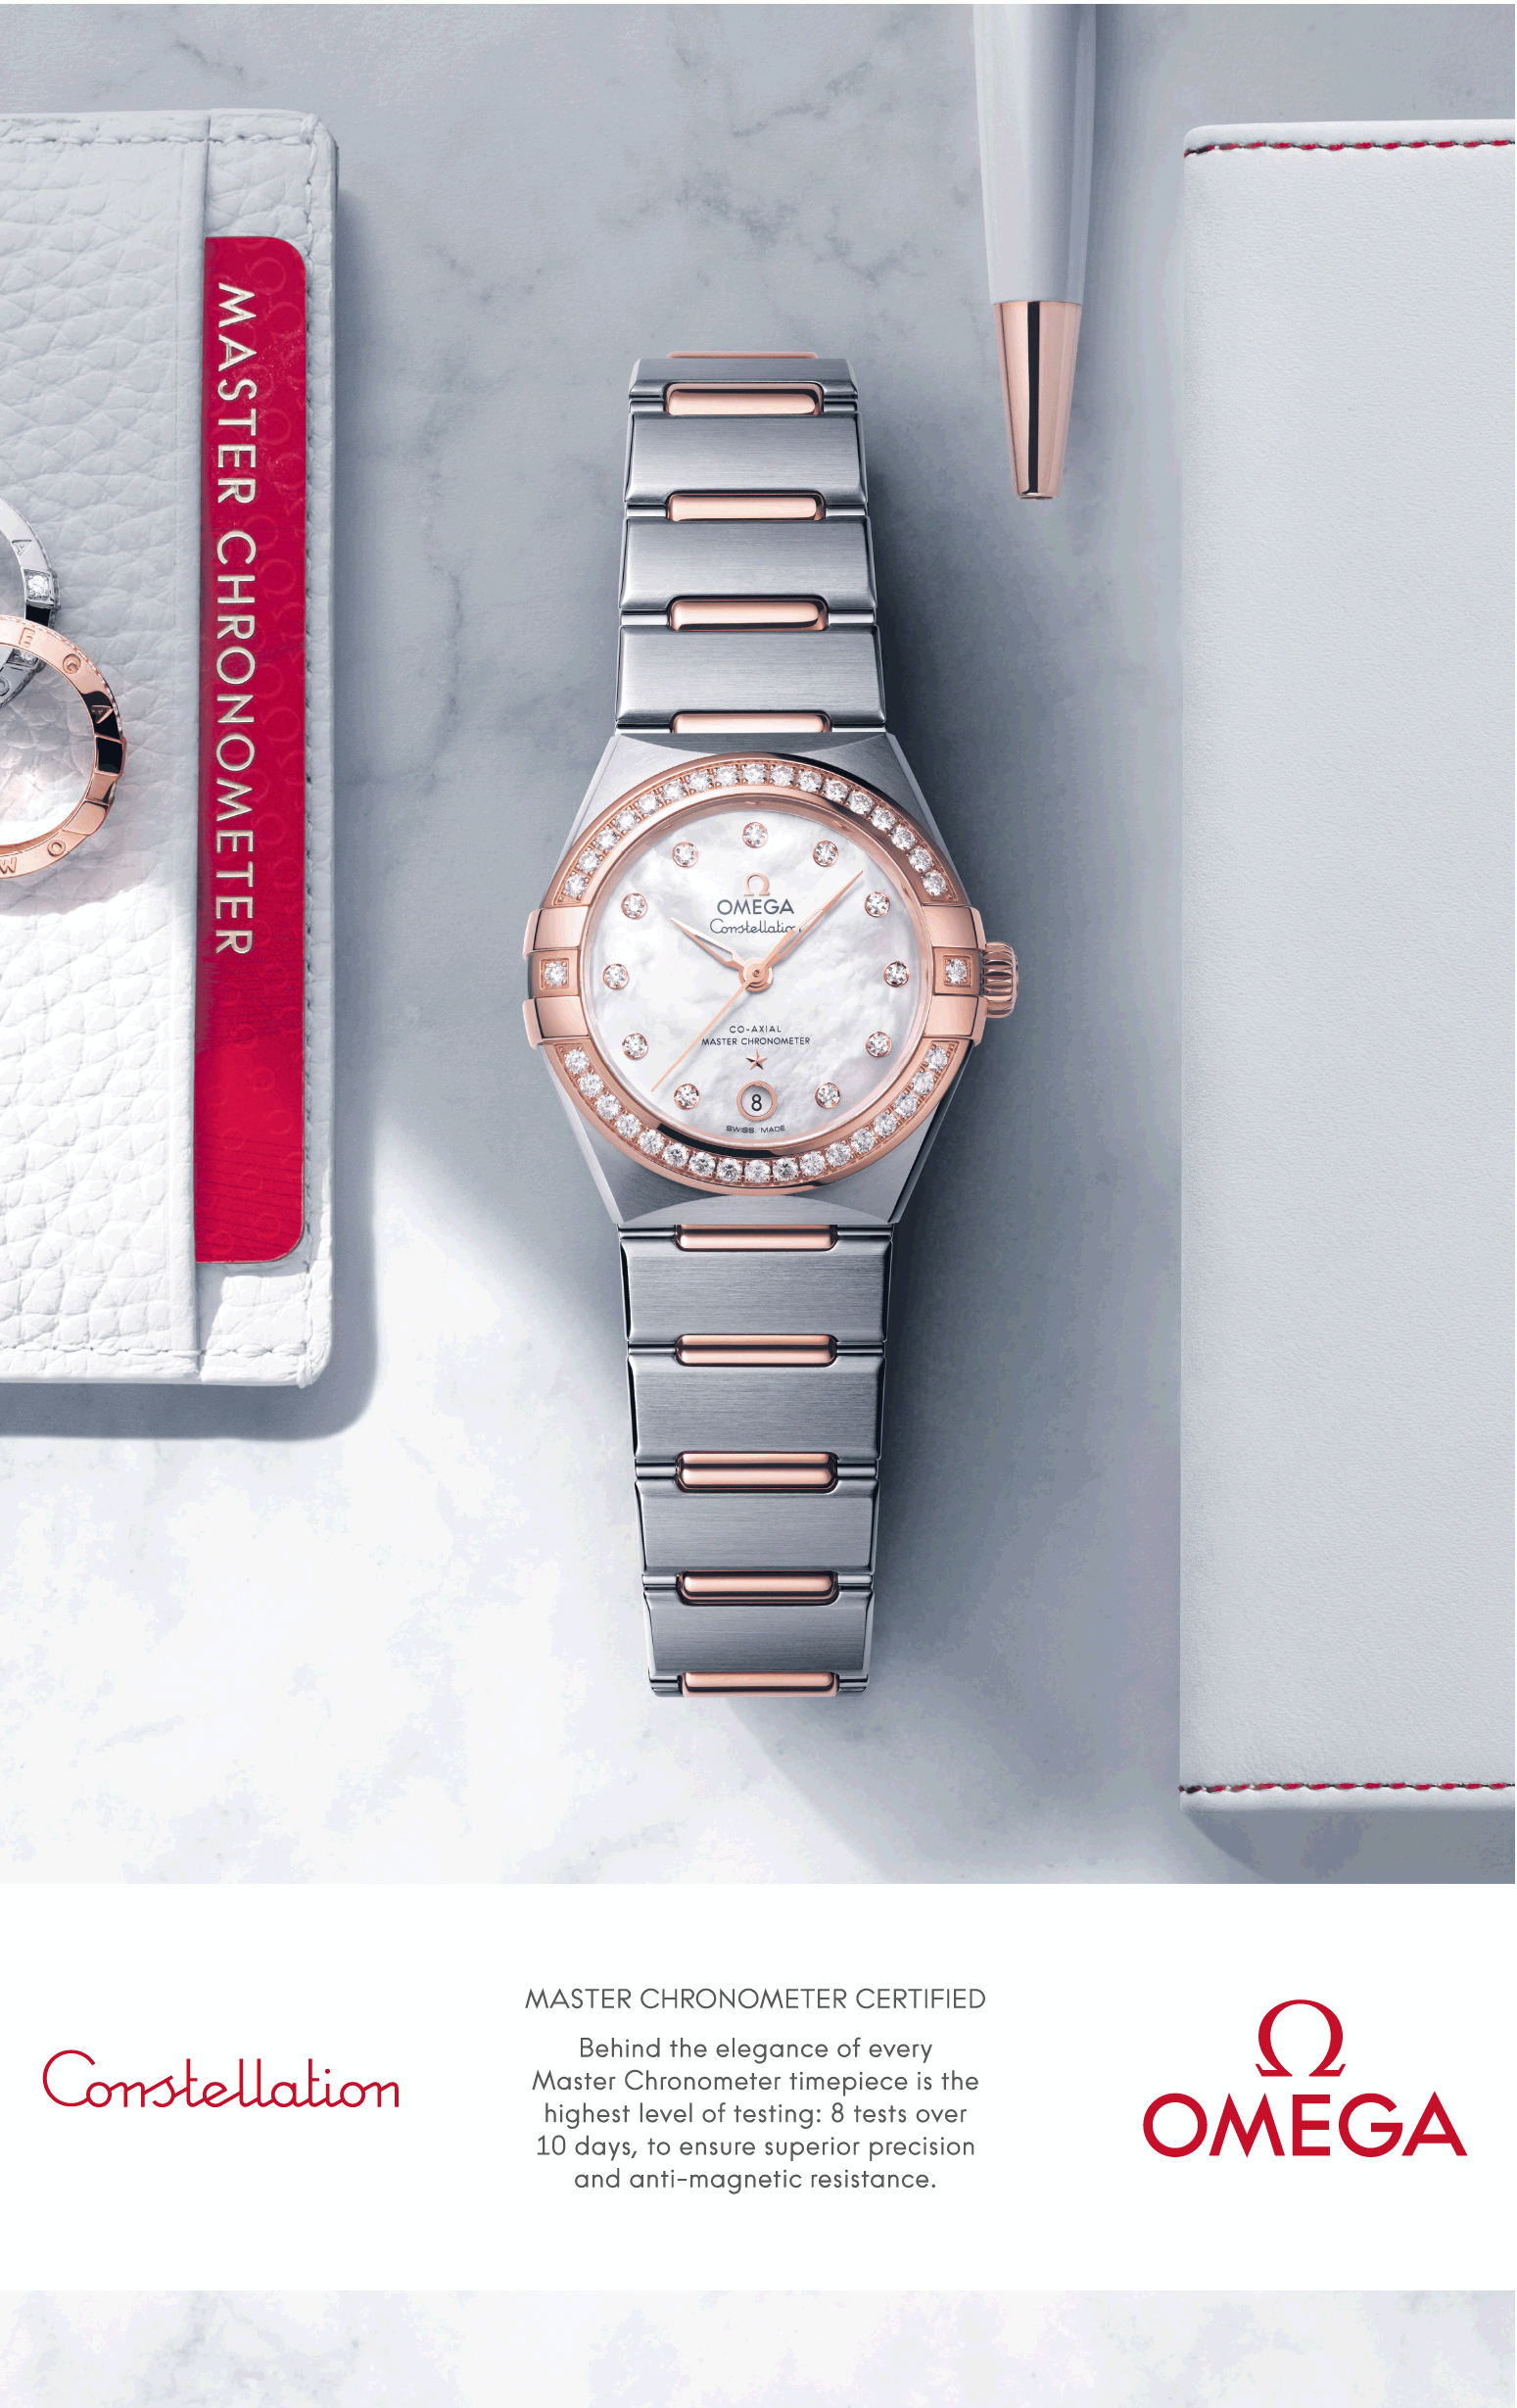 omega-constellation-master-chronometer-certified-ad-bombay-times-16-10-2020